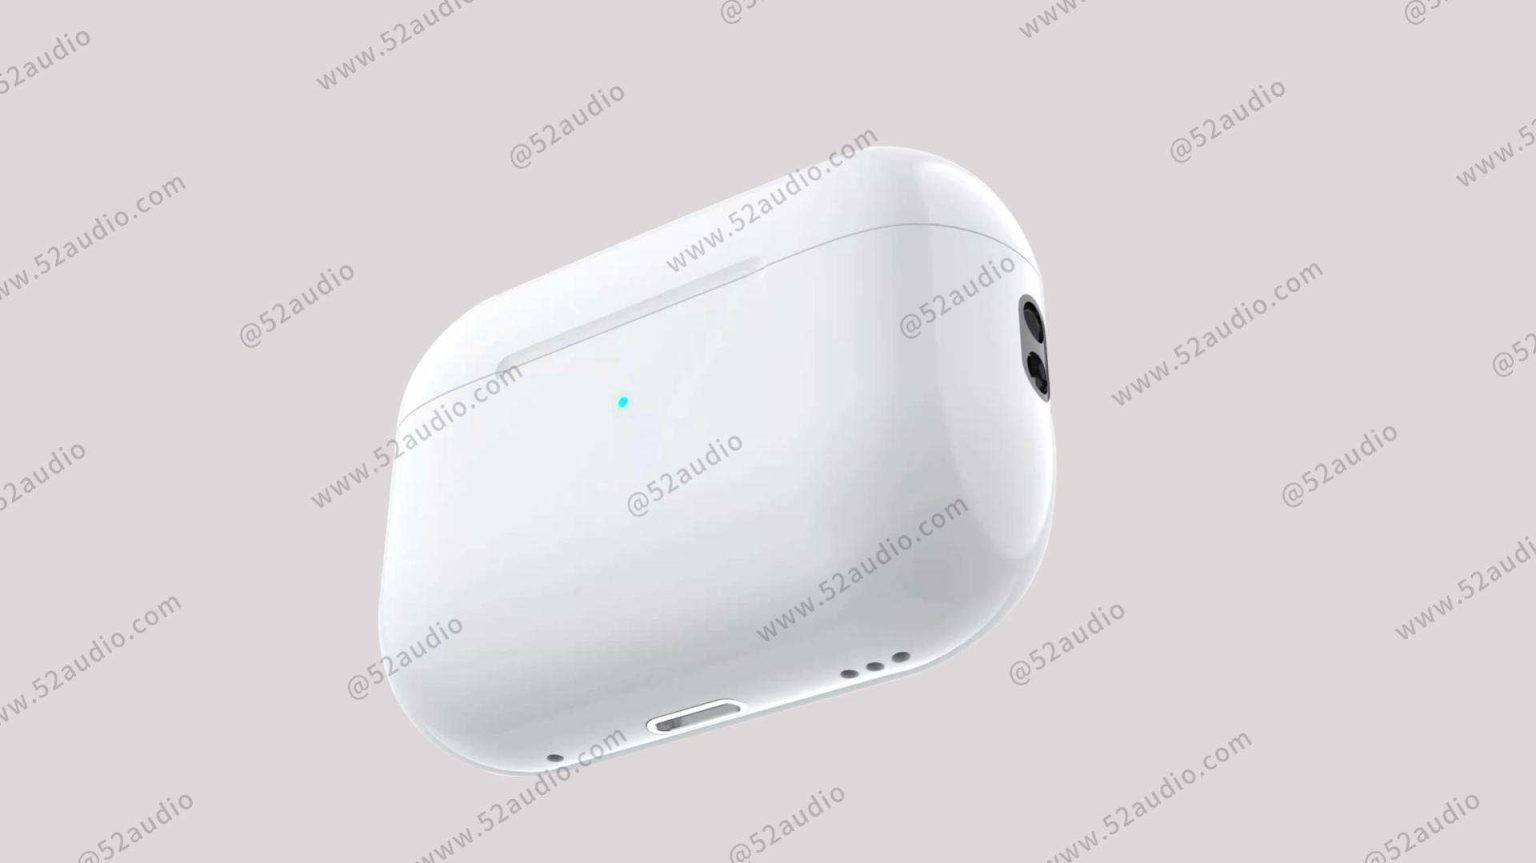 AirPods Pro 2 Charging Case Render